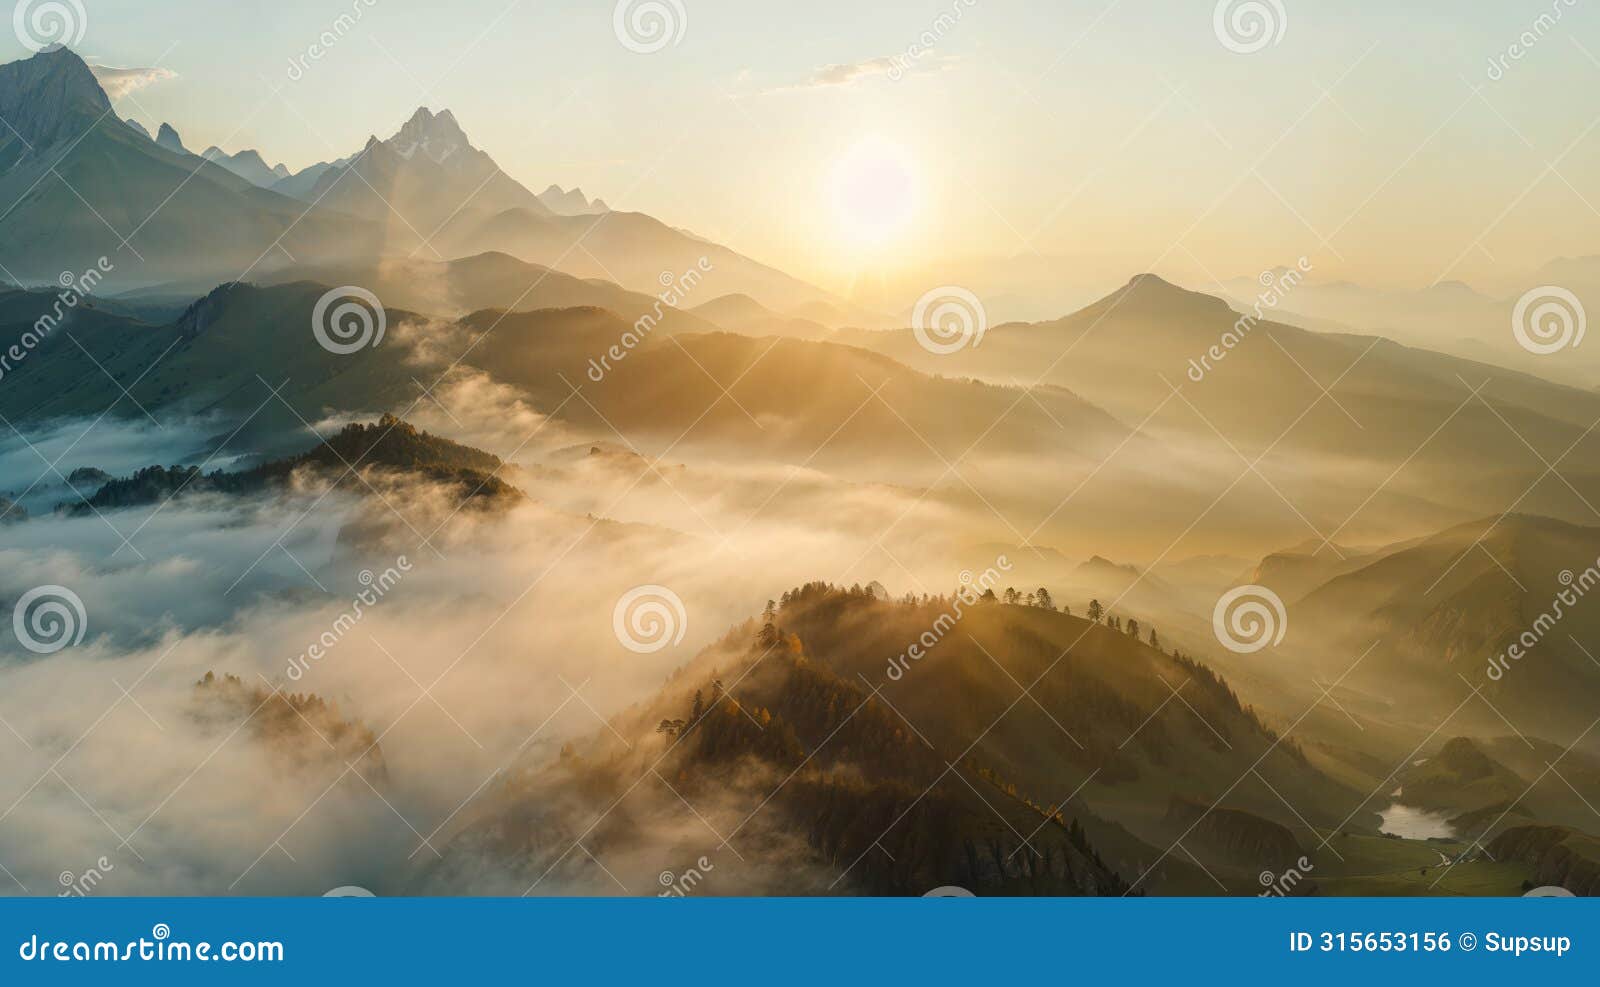 sunlight streaming through clouds on mountainous landscape